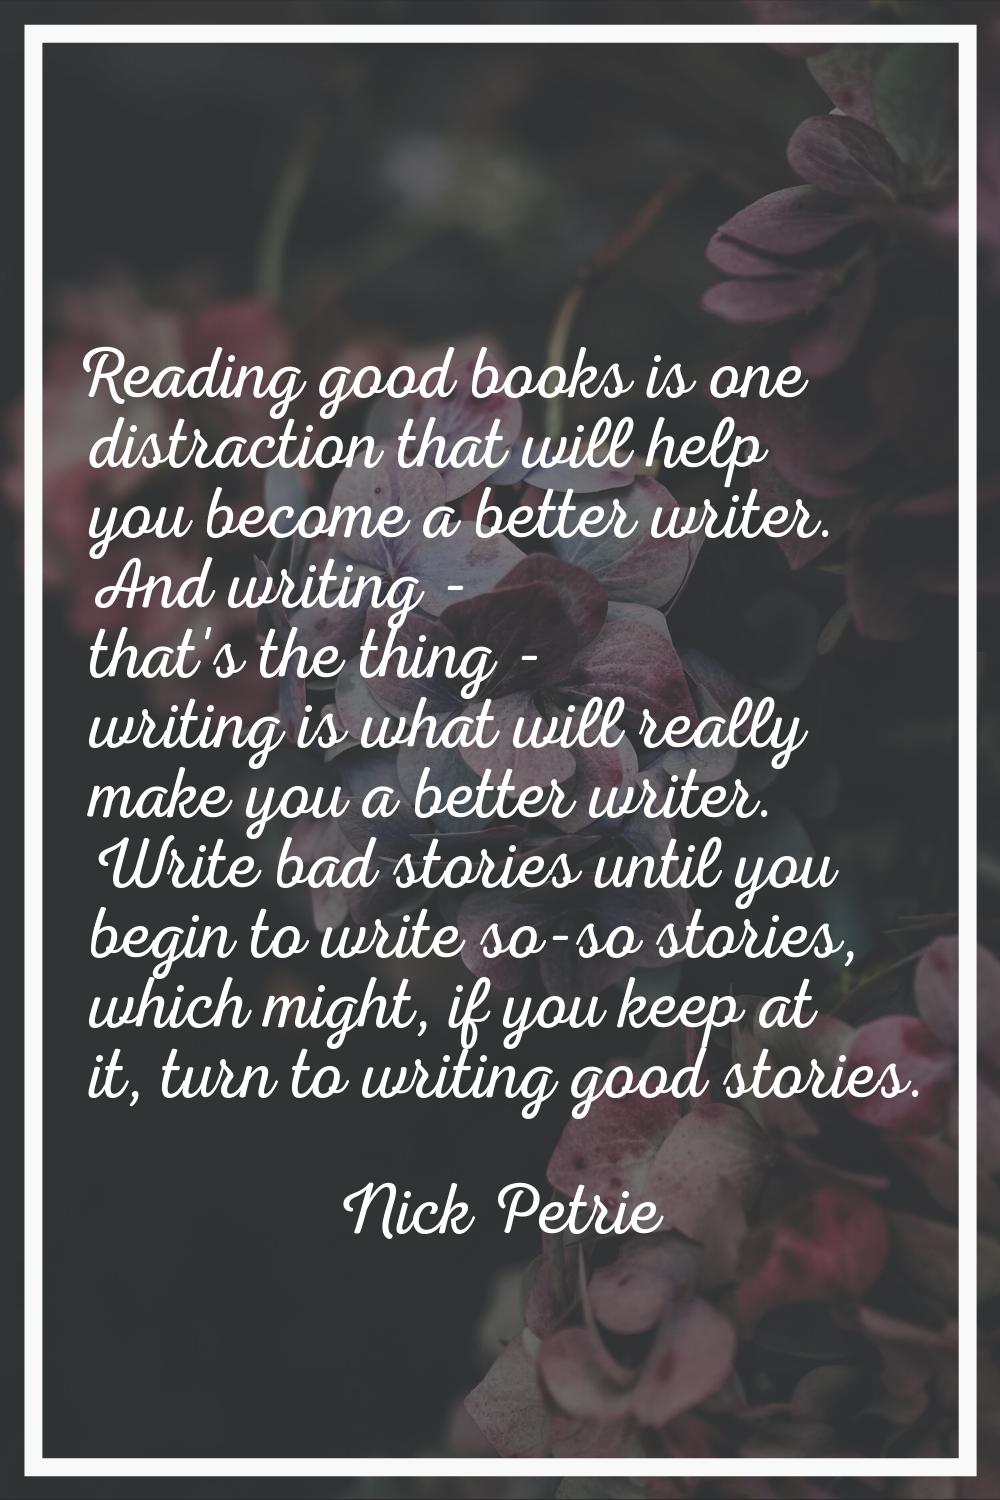 Reading good books is one distraction that will help you become a better writer. And writing - that